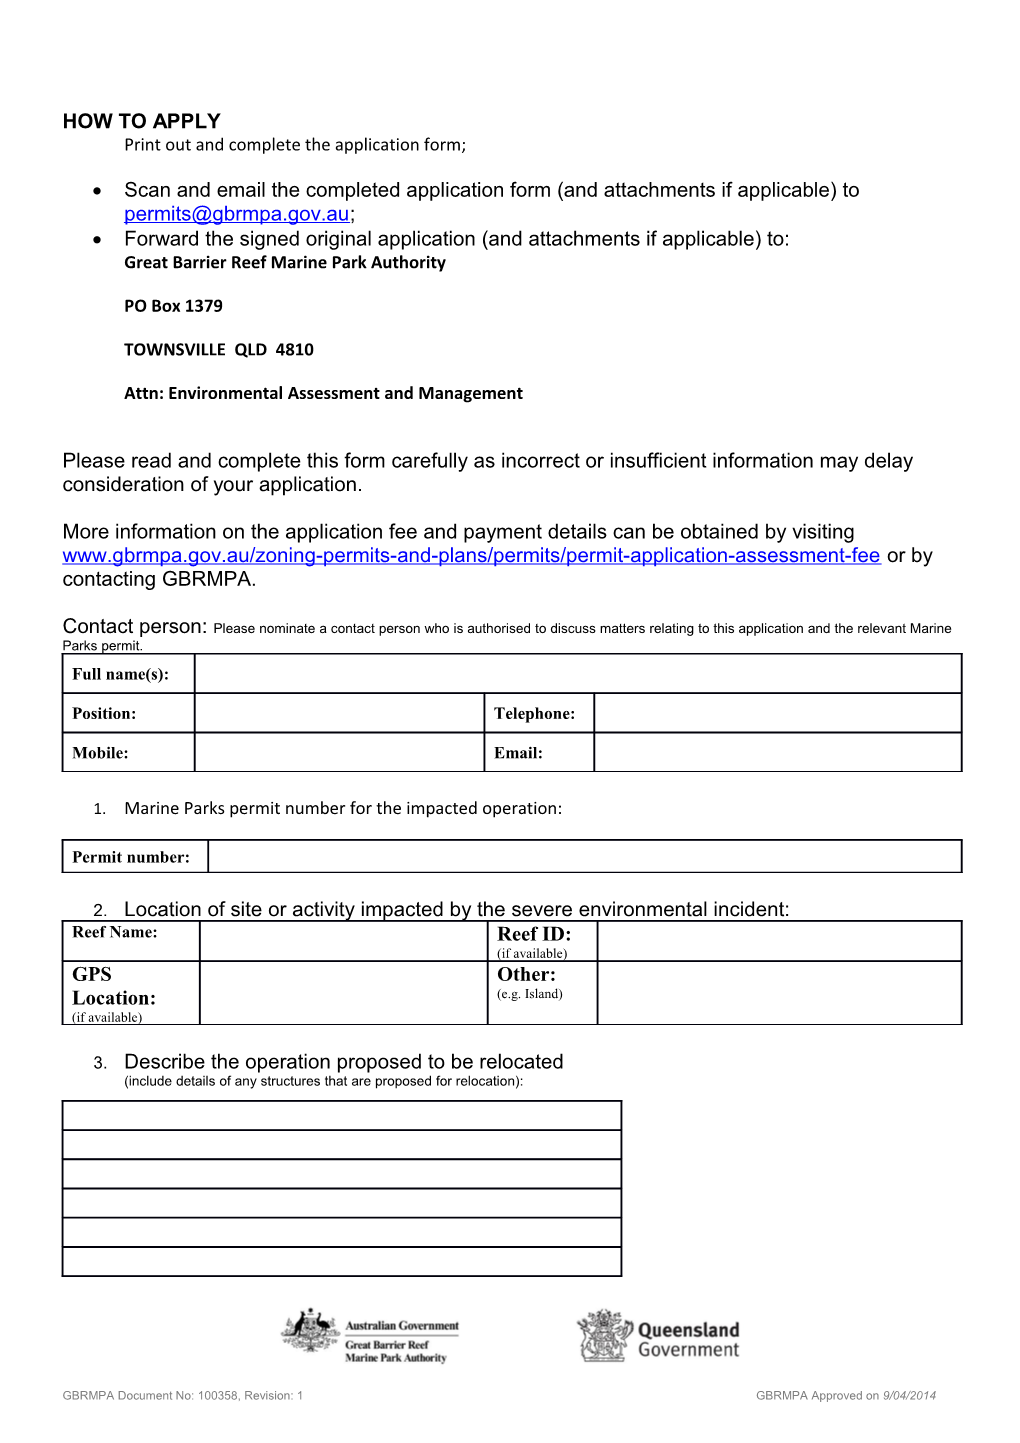 Print out and Complete the Application Form;